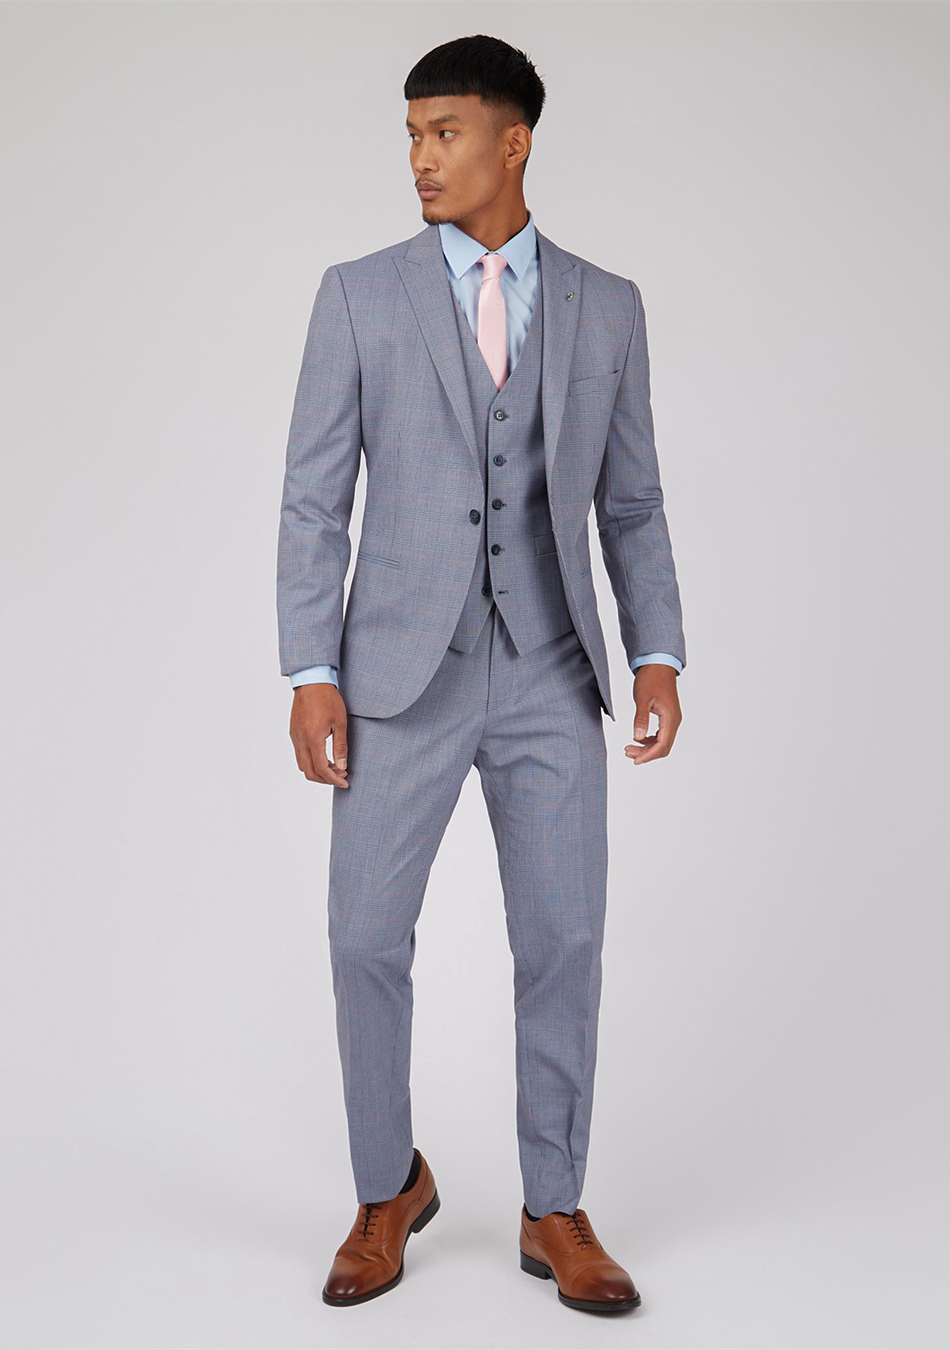 Light grey suit, white shirt with blue wide pinstripes, navy tie with white  pin dots | Gray suit, Grey suit styling, Suits